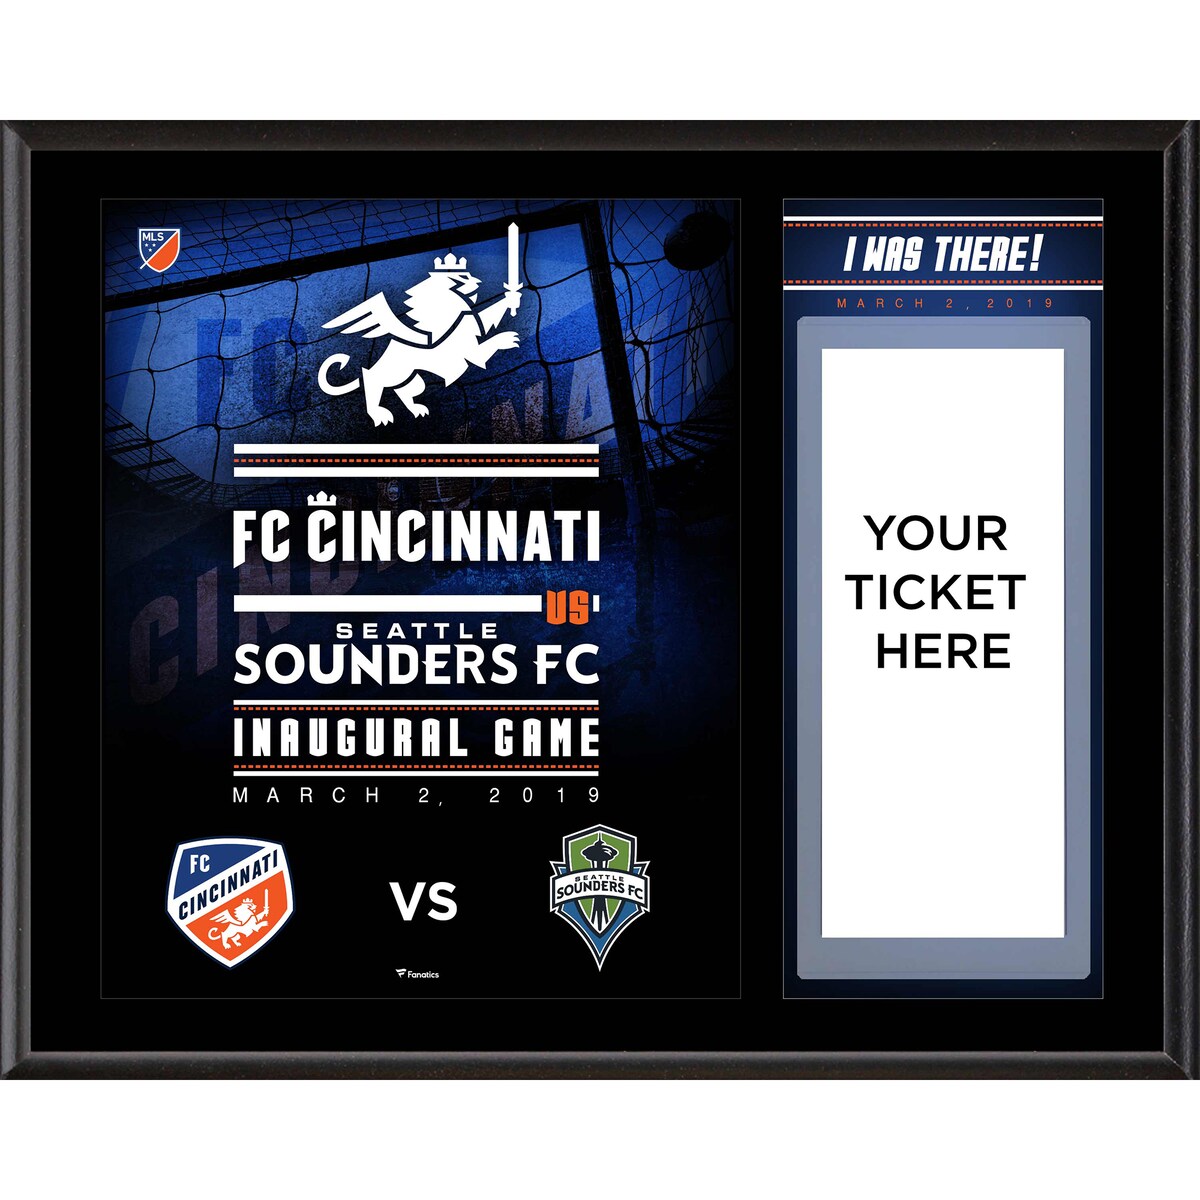 Commemorate the FC Cincinnati inaugural game with this 'I WAS THERE' Plaque. This 12" x 15" plaque with black finish comes with an 8" x 10" photograph. It also features an acrylic ticket holder to display your ticket. The product is officially licensed by the MLS. Overall dimensions are 12" x 15". Ticket holder fits standard sized tickets only. VIP or electronic tickets may not fit properly.Framed collageBrand: Fanatics AuthenticOfficially licensed